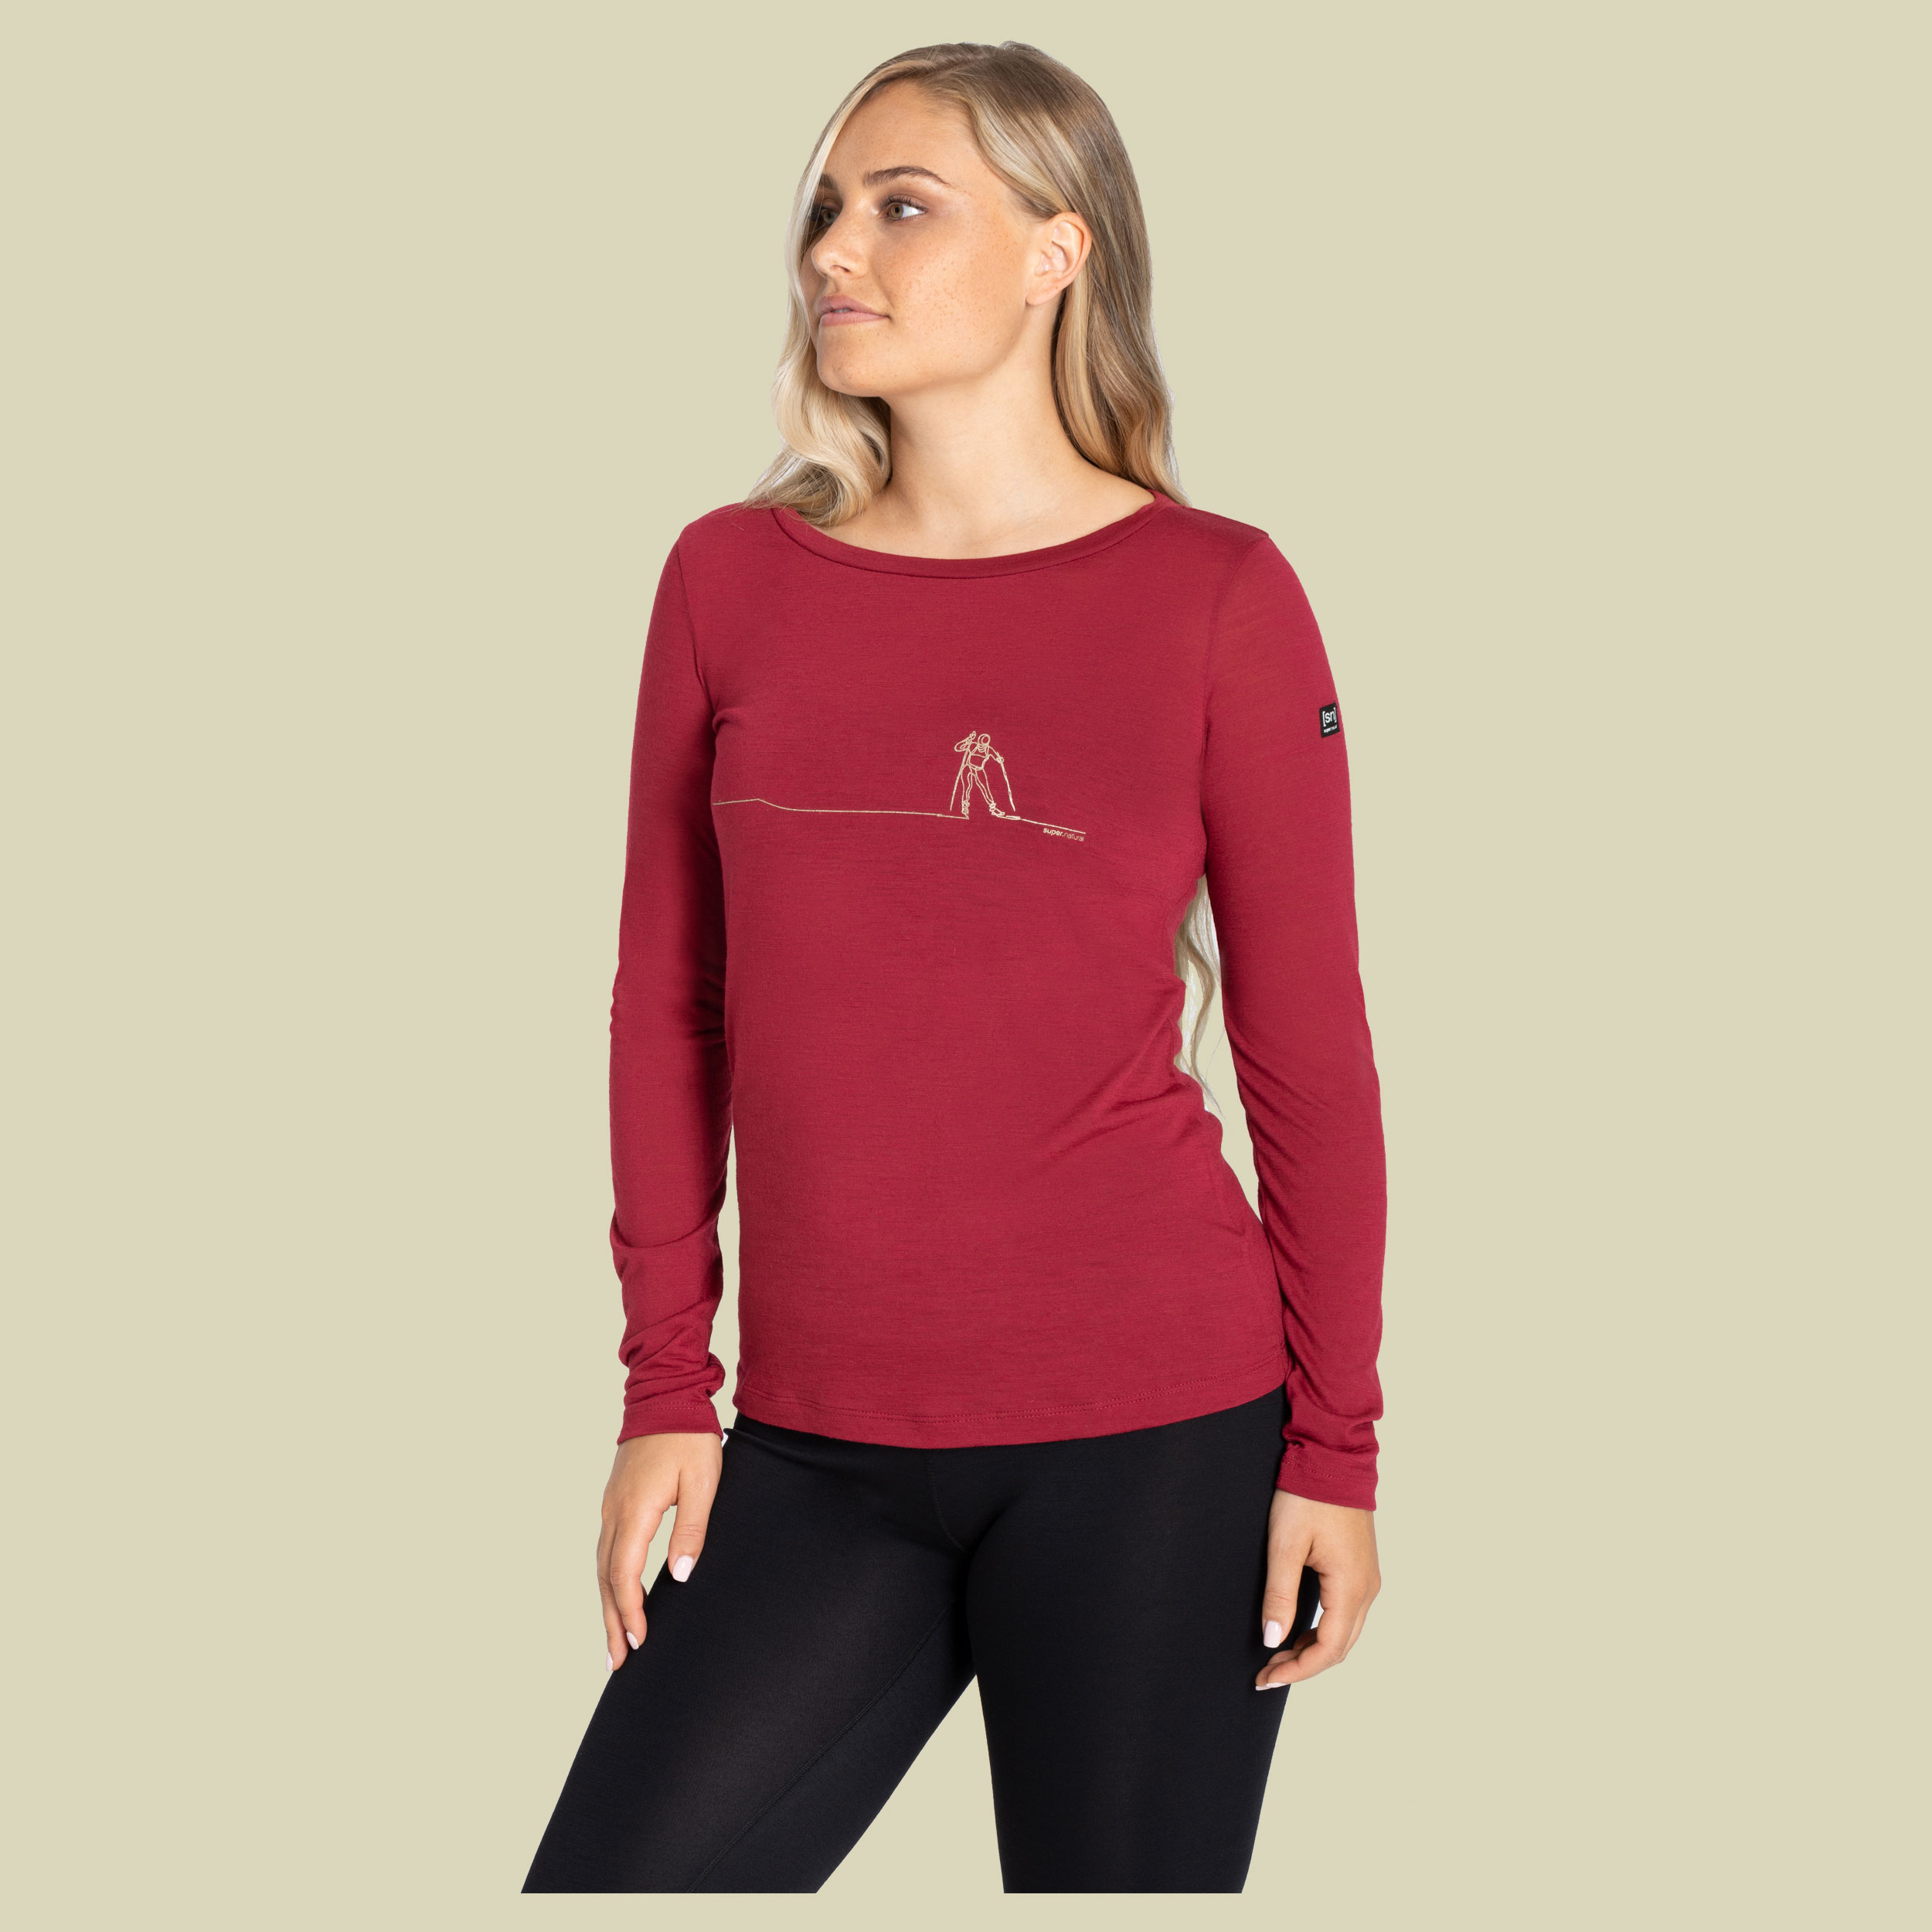 Cross Country LS Women Größe S Farbe rumba red/gold